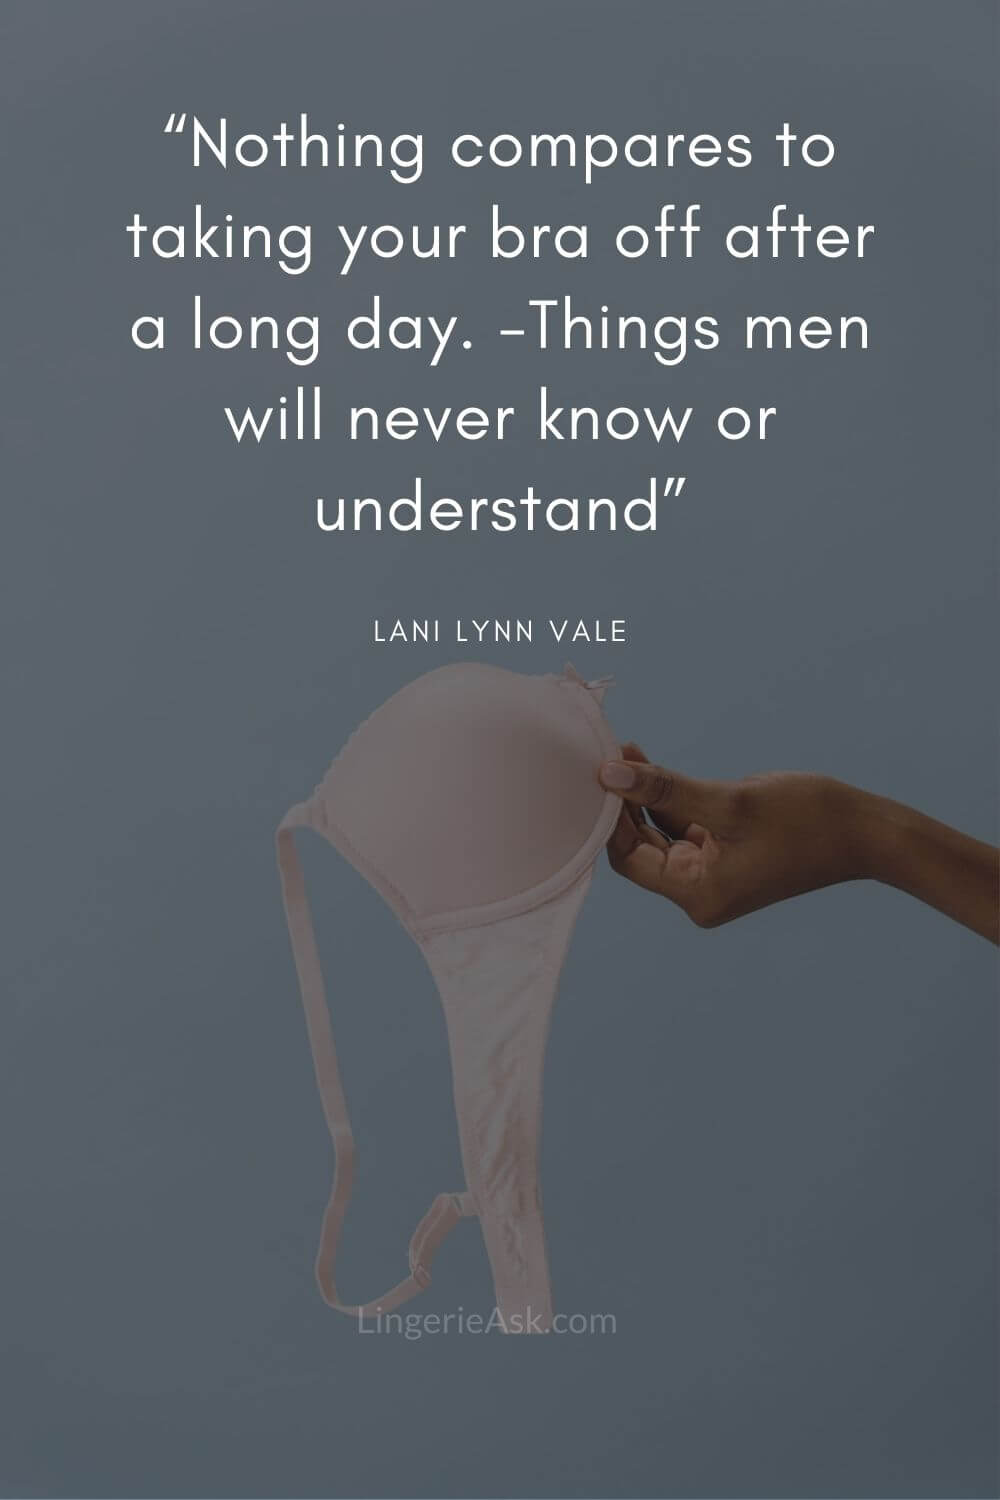 “Nothing compares to taking your bra off after a long day. -Things men will never know or understand”